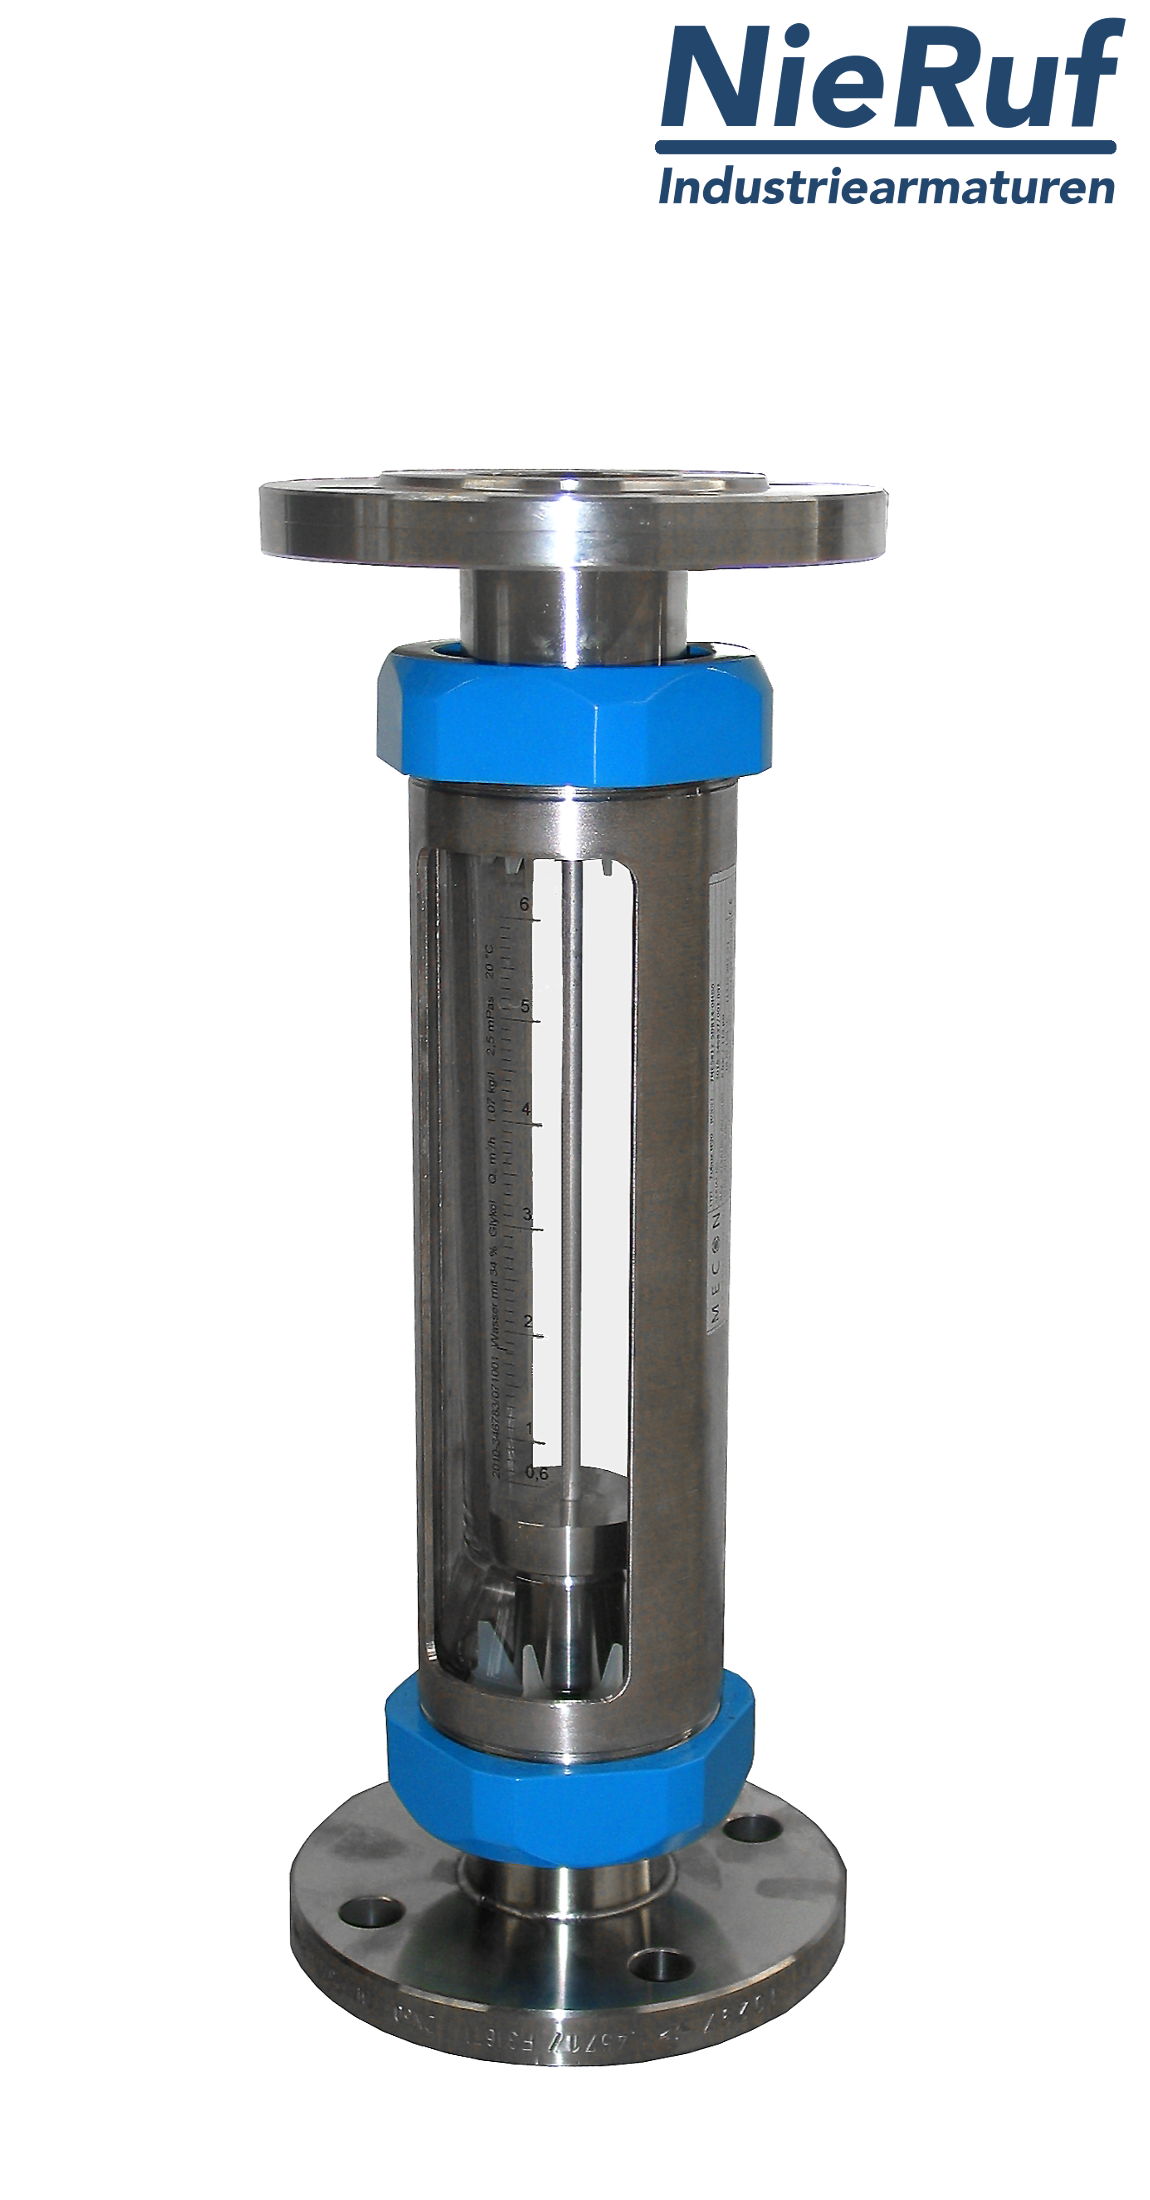 Variable area flowmeter stainless steel + borosilicate flange DN50 2000.0 - 12500 l/h water FKM